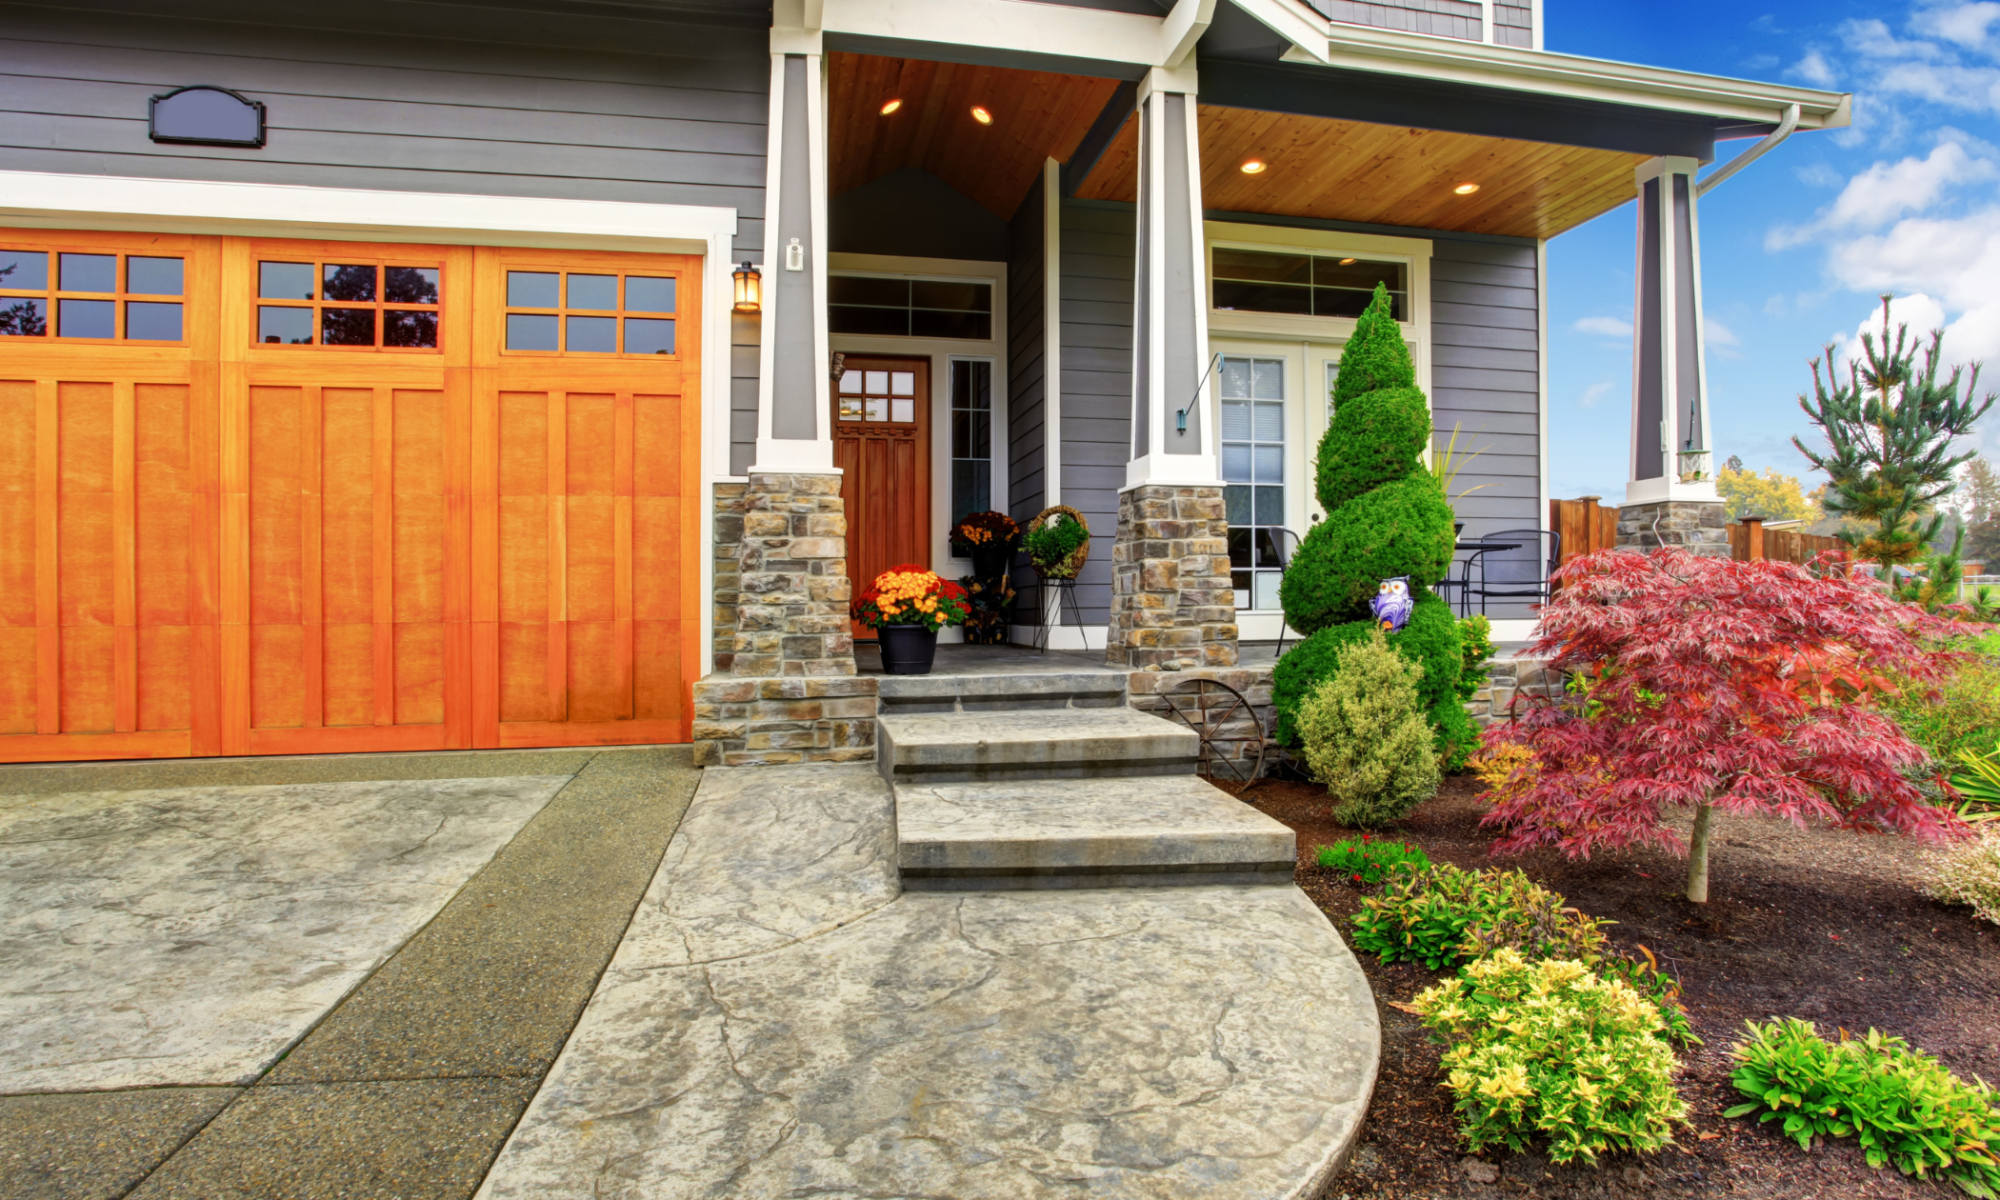 House exterior with curb appeal⁠